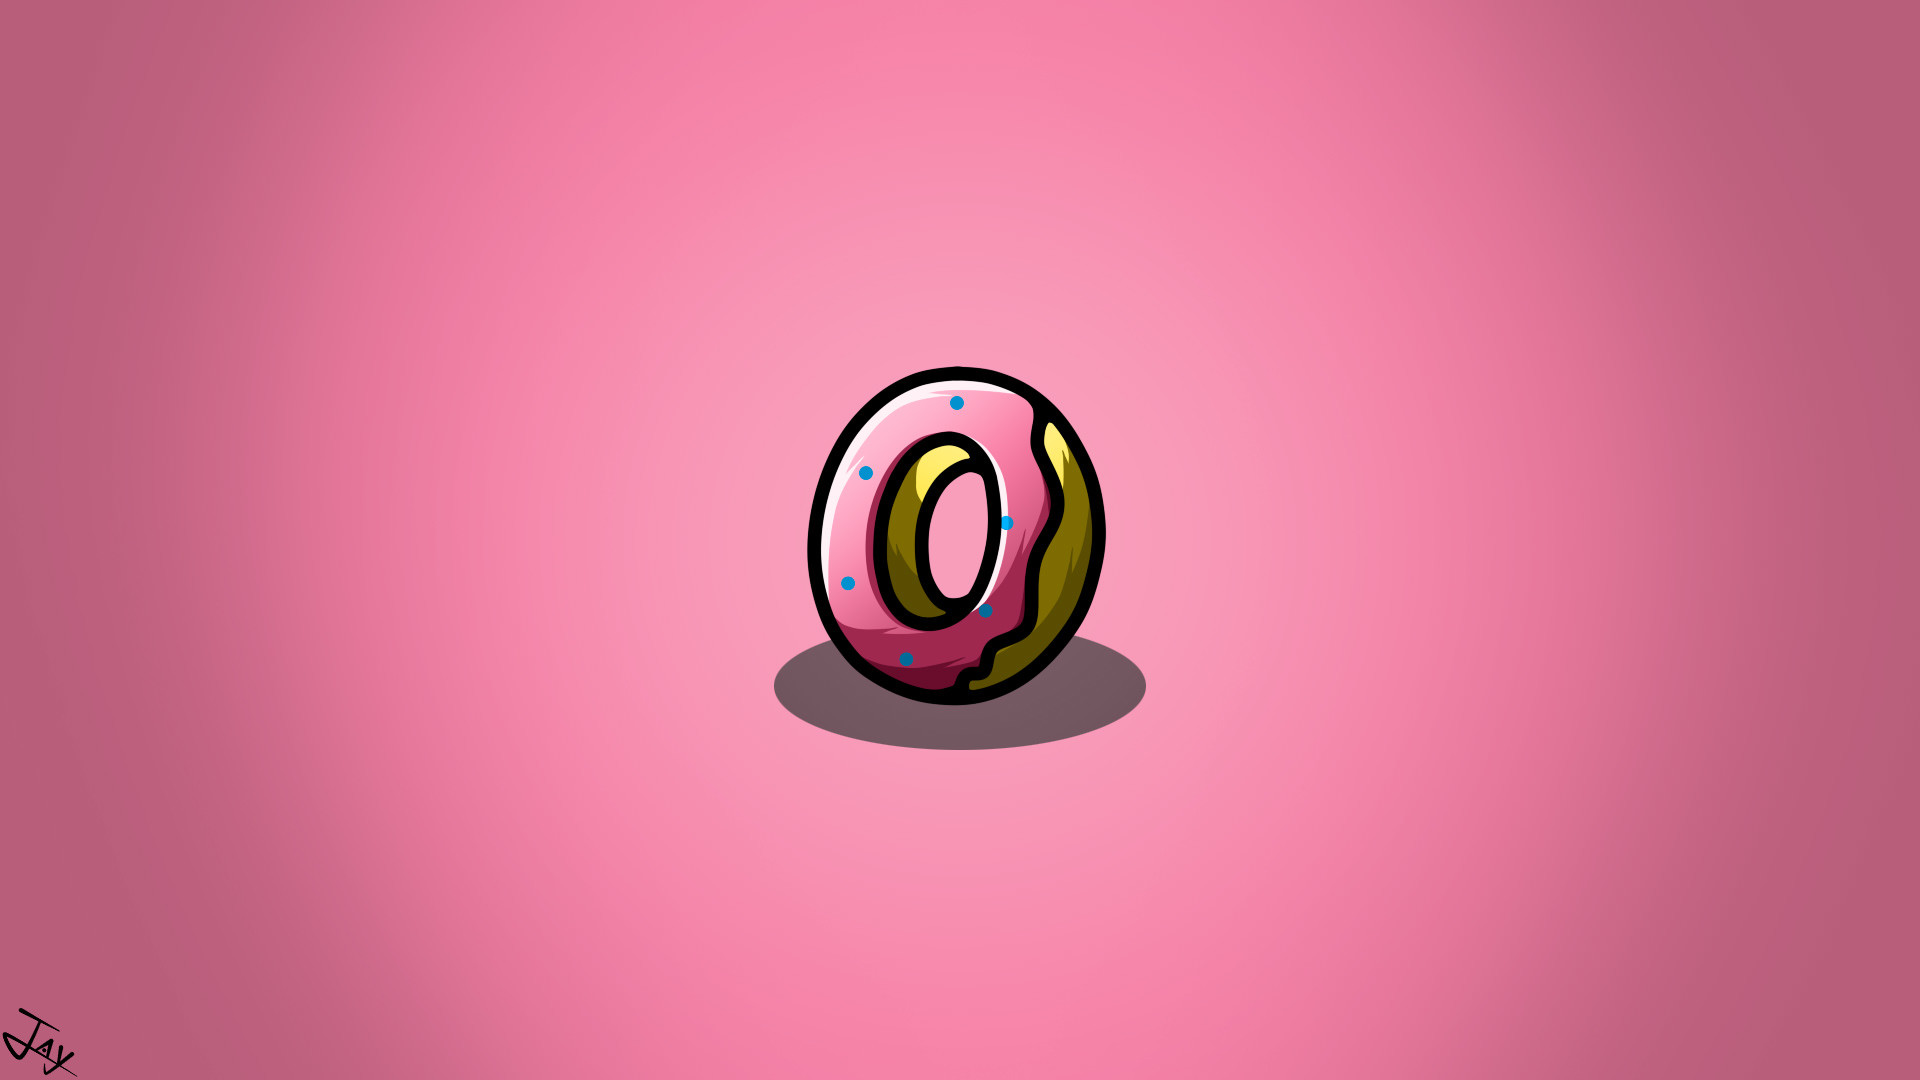 1920x1080 1280x853 Donuts images donuts---------------------- HD wallpaper and .